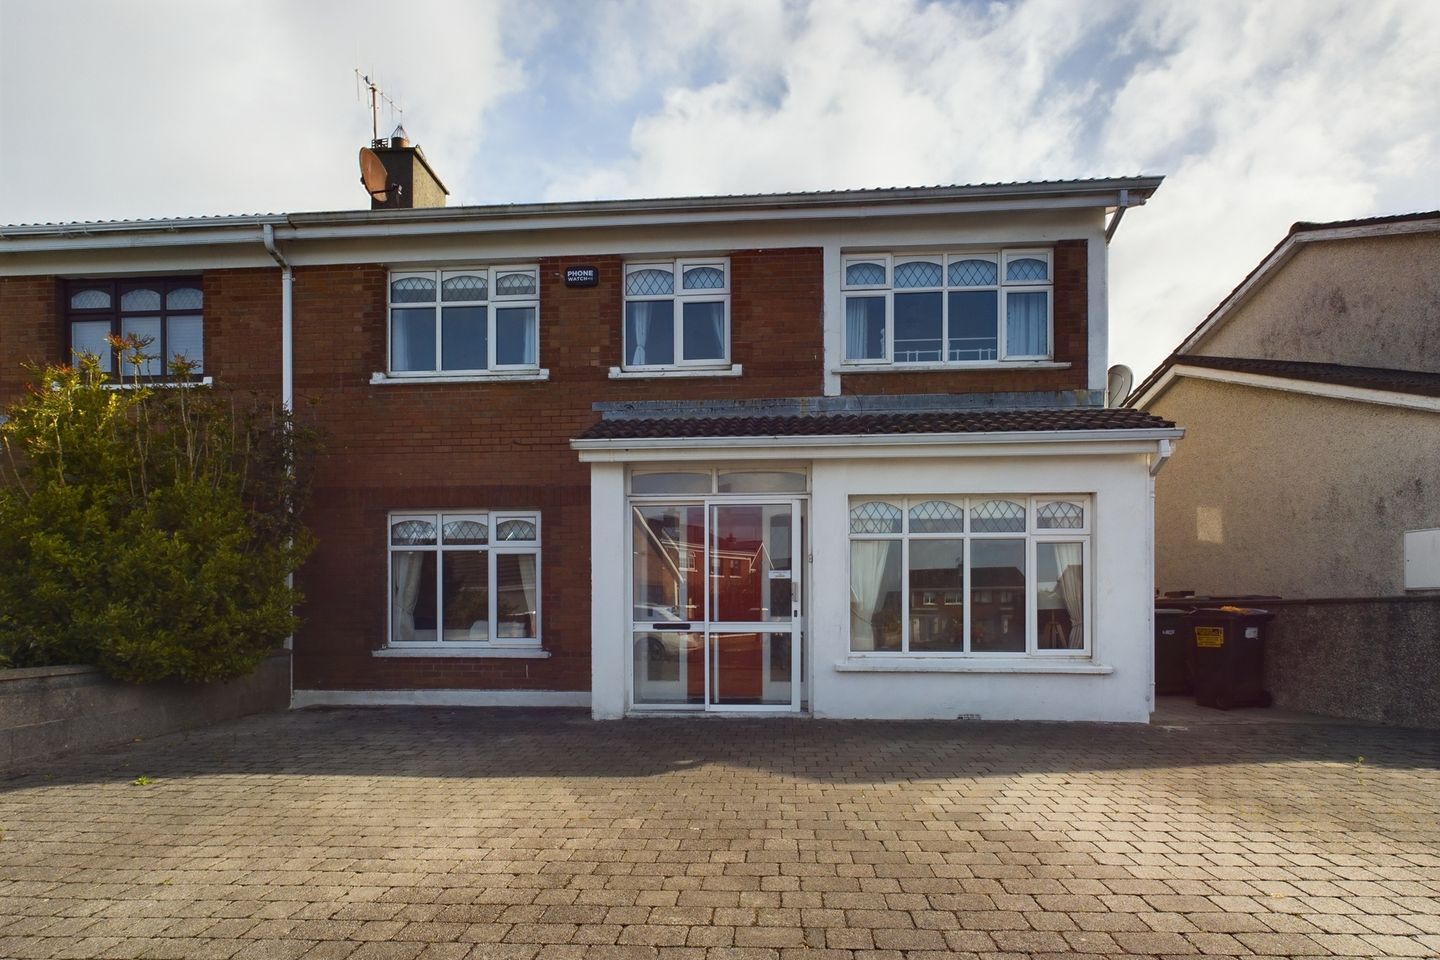 12 Ursuline Crescent, Waterford City, Co. Waterford, X91YFH2